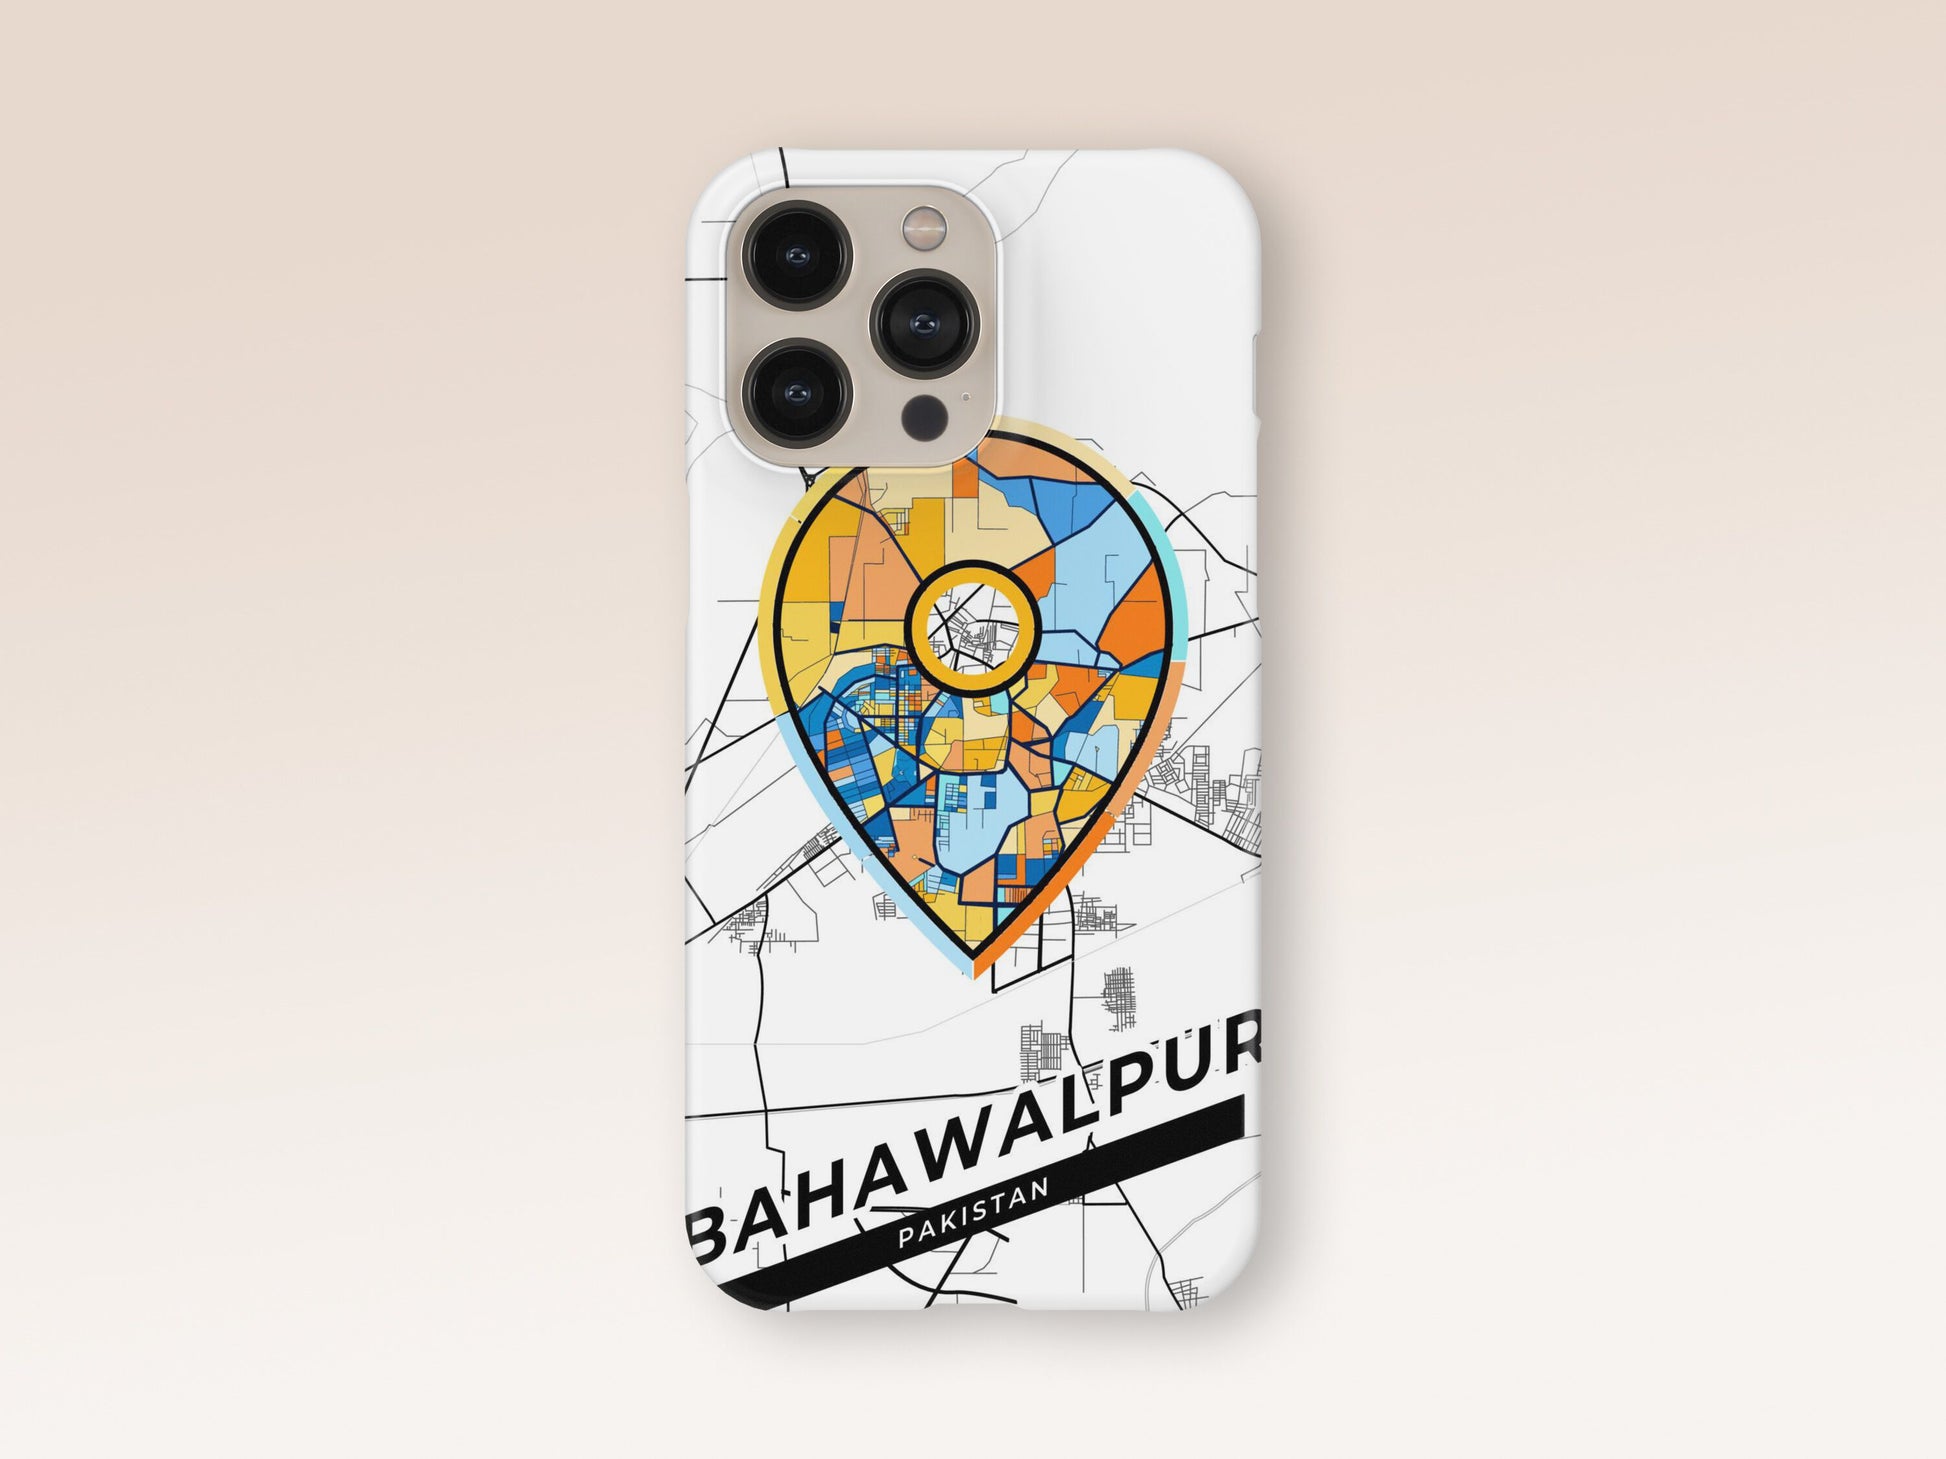 Bahawalpur Pakistan slim phone case with colorful icon. Birthday, wedding or housewarming gift. Couple match cases. 1